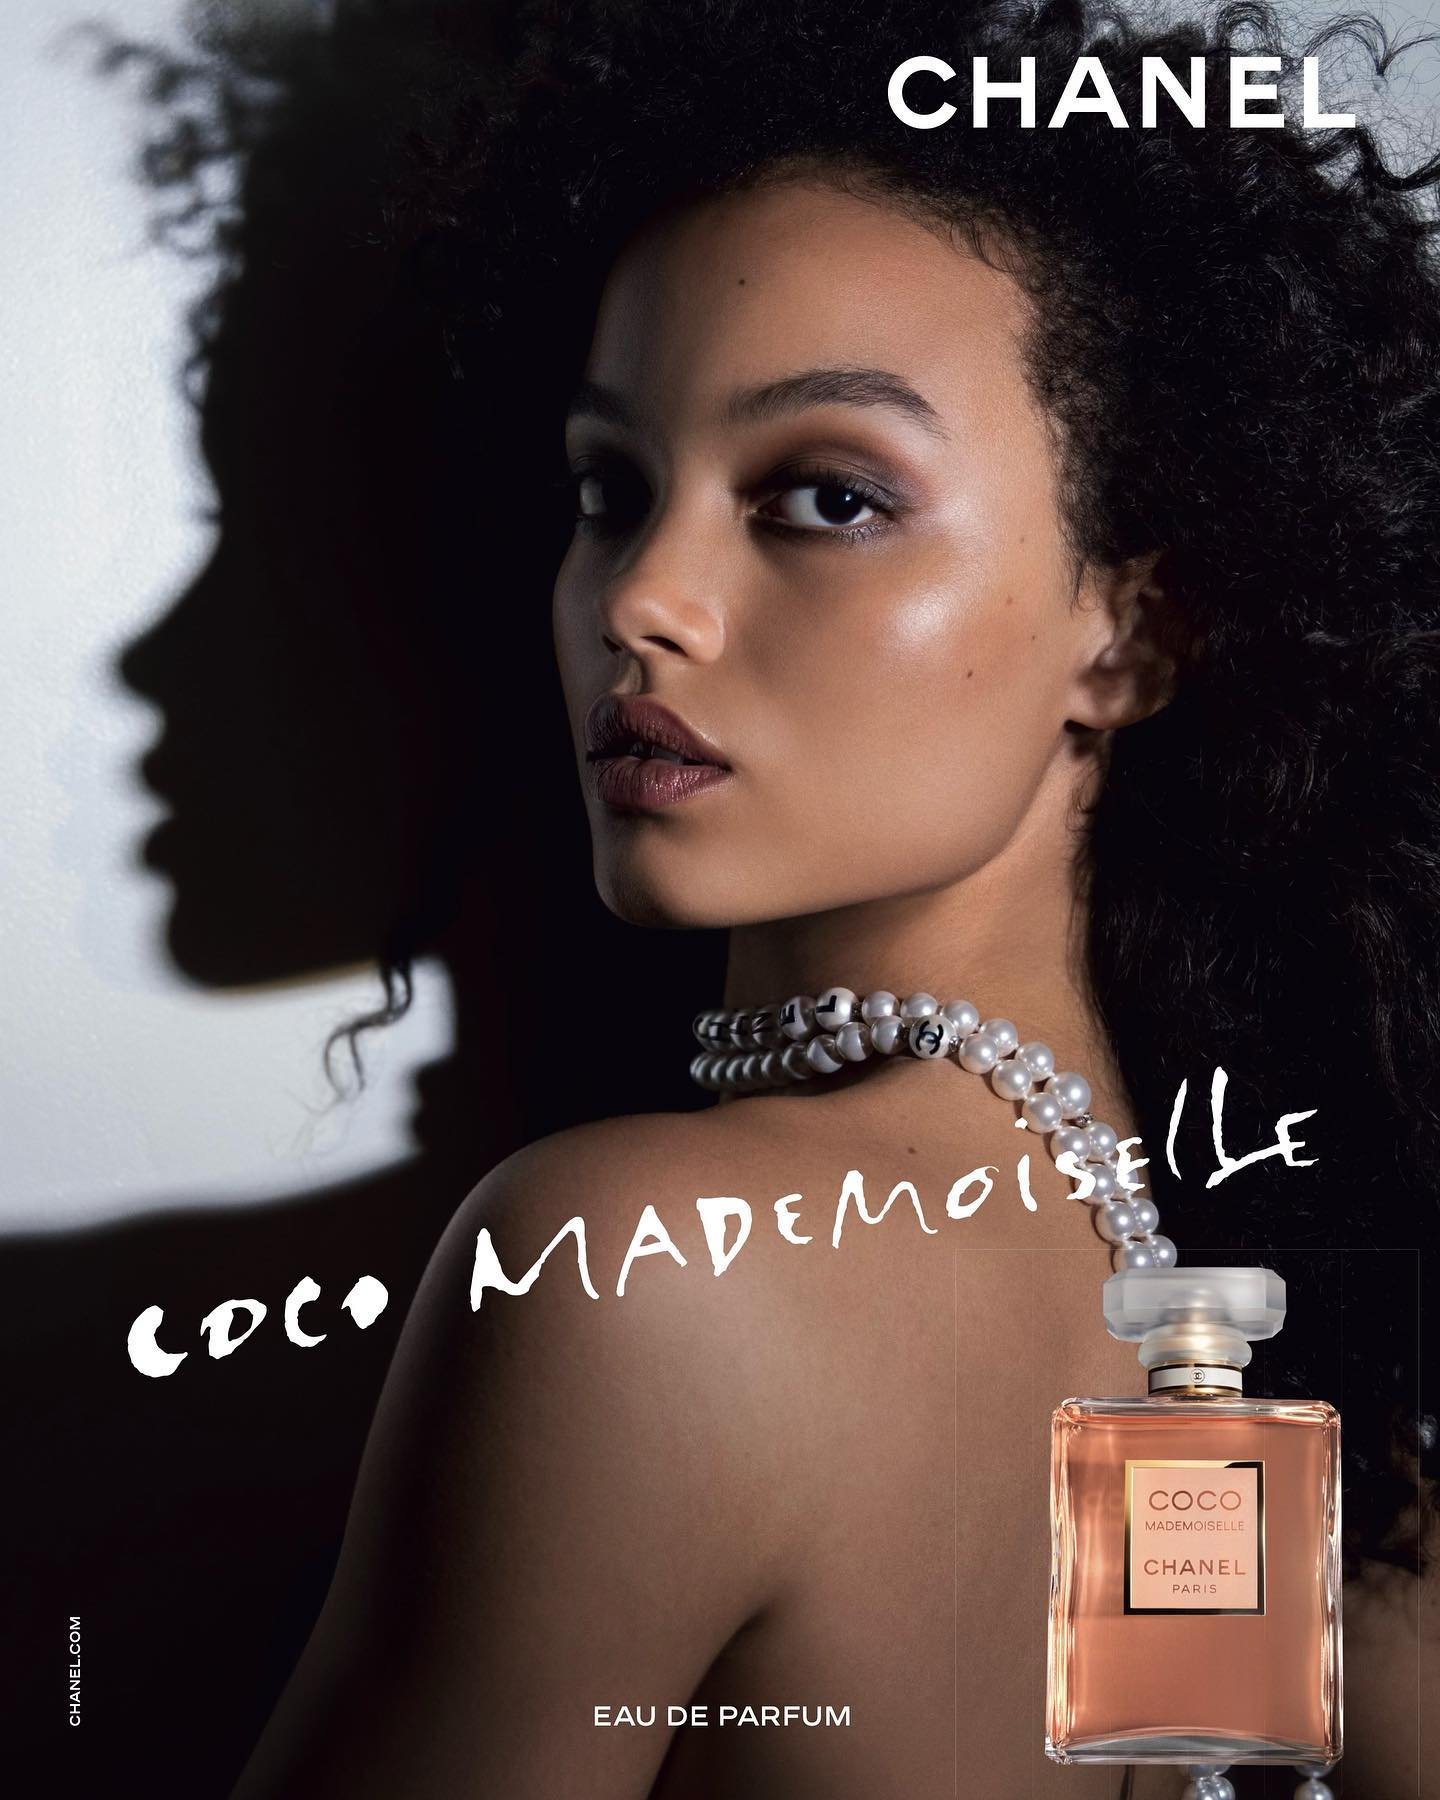 A New Face For Coco Mademoiselle - The Gloss Magazine